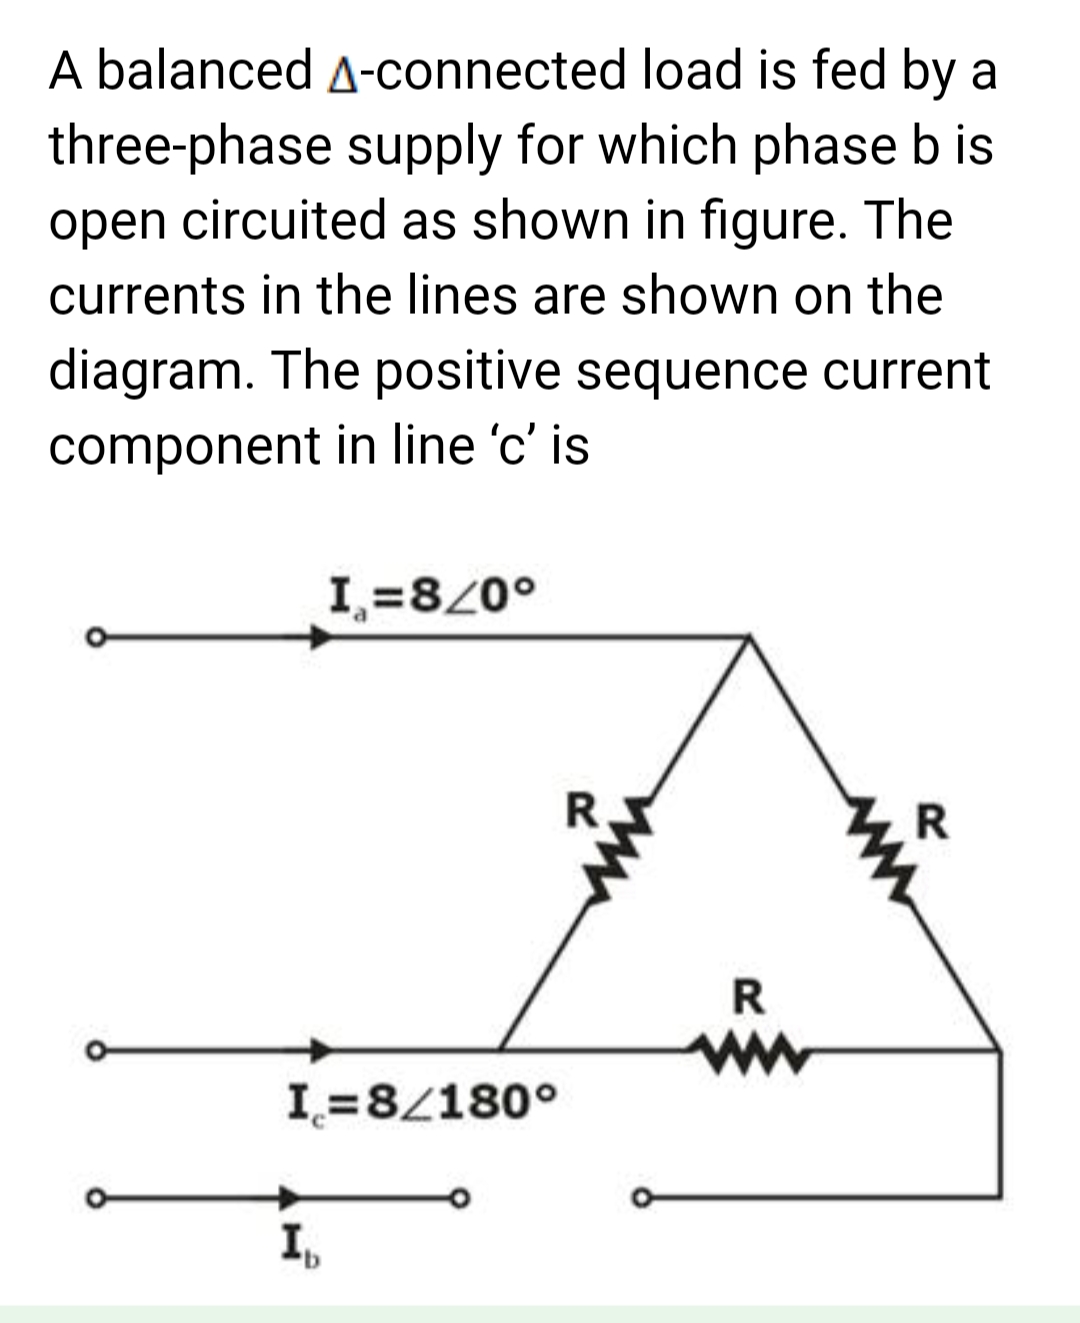 A balanced A-connected load is fed by a
three-phase supply for which phase b is
open circuited as shown in figure. The
currents in the lines are shown on the
diagram. The positive sequence current
component in line 'c' is
I=8/0°
I=8/180°
Ib
R
R